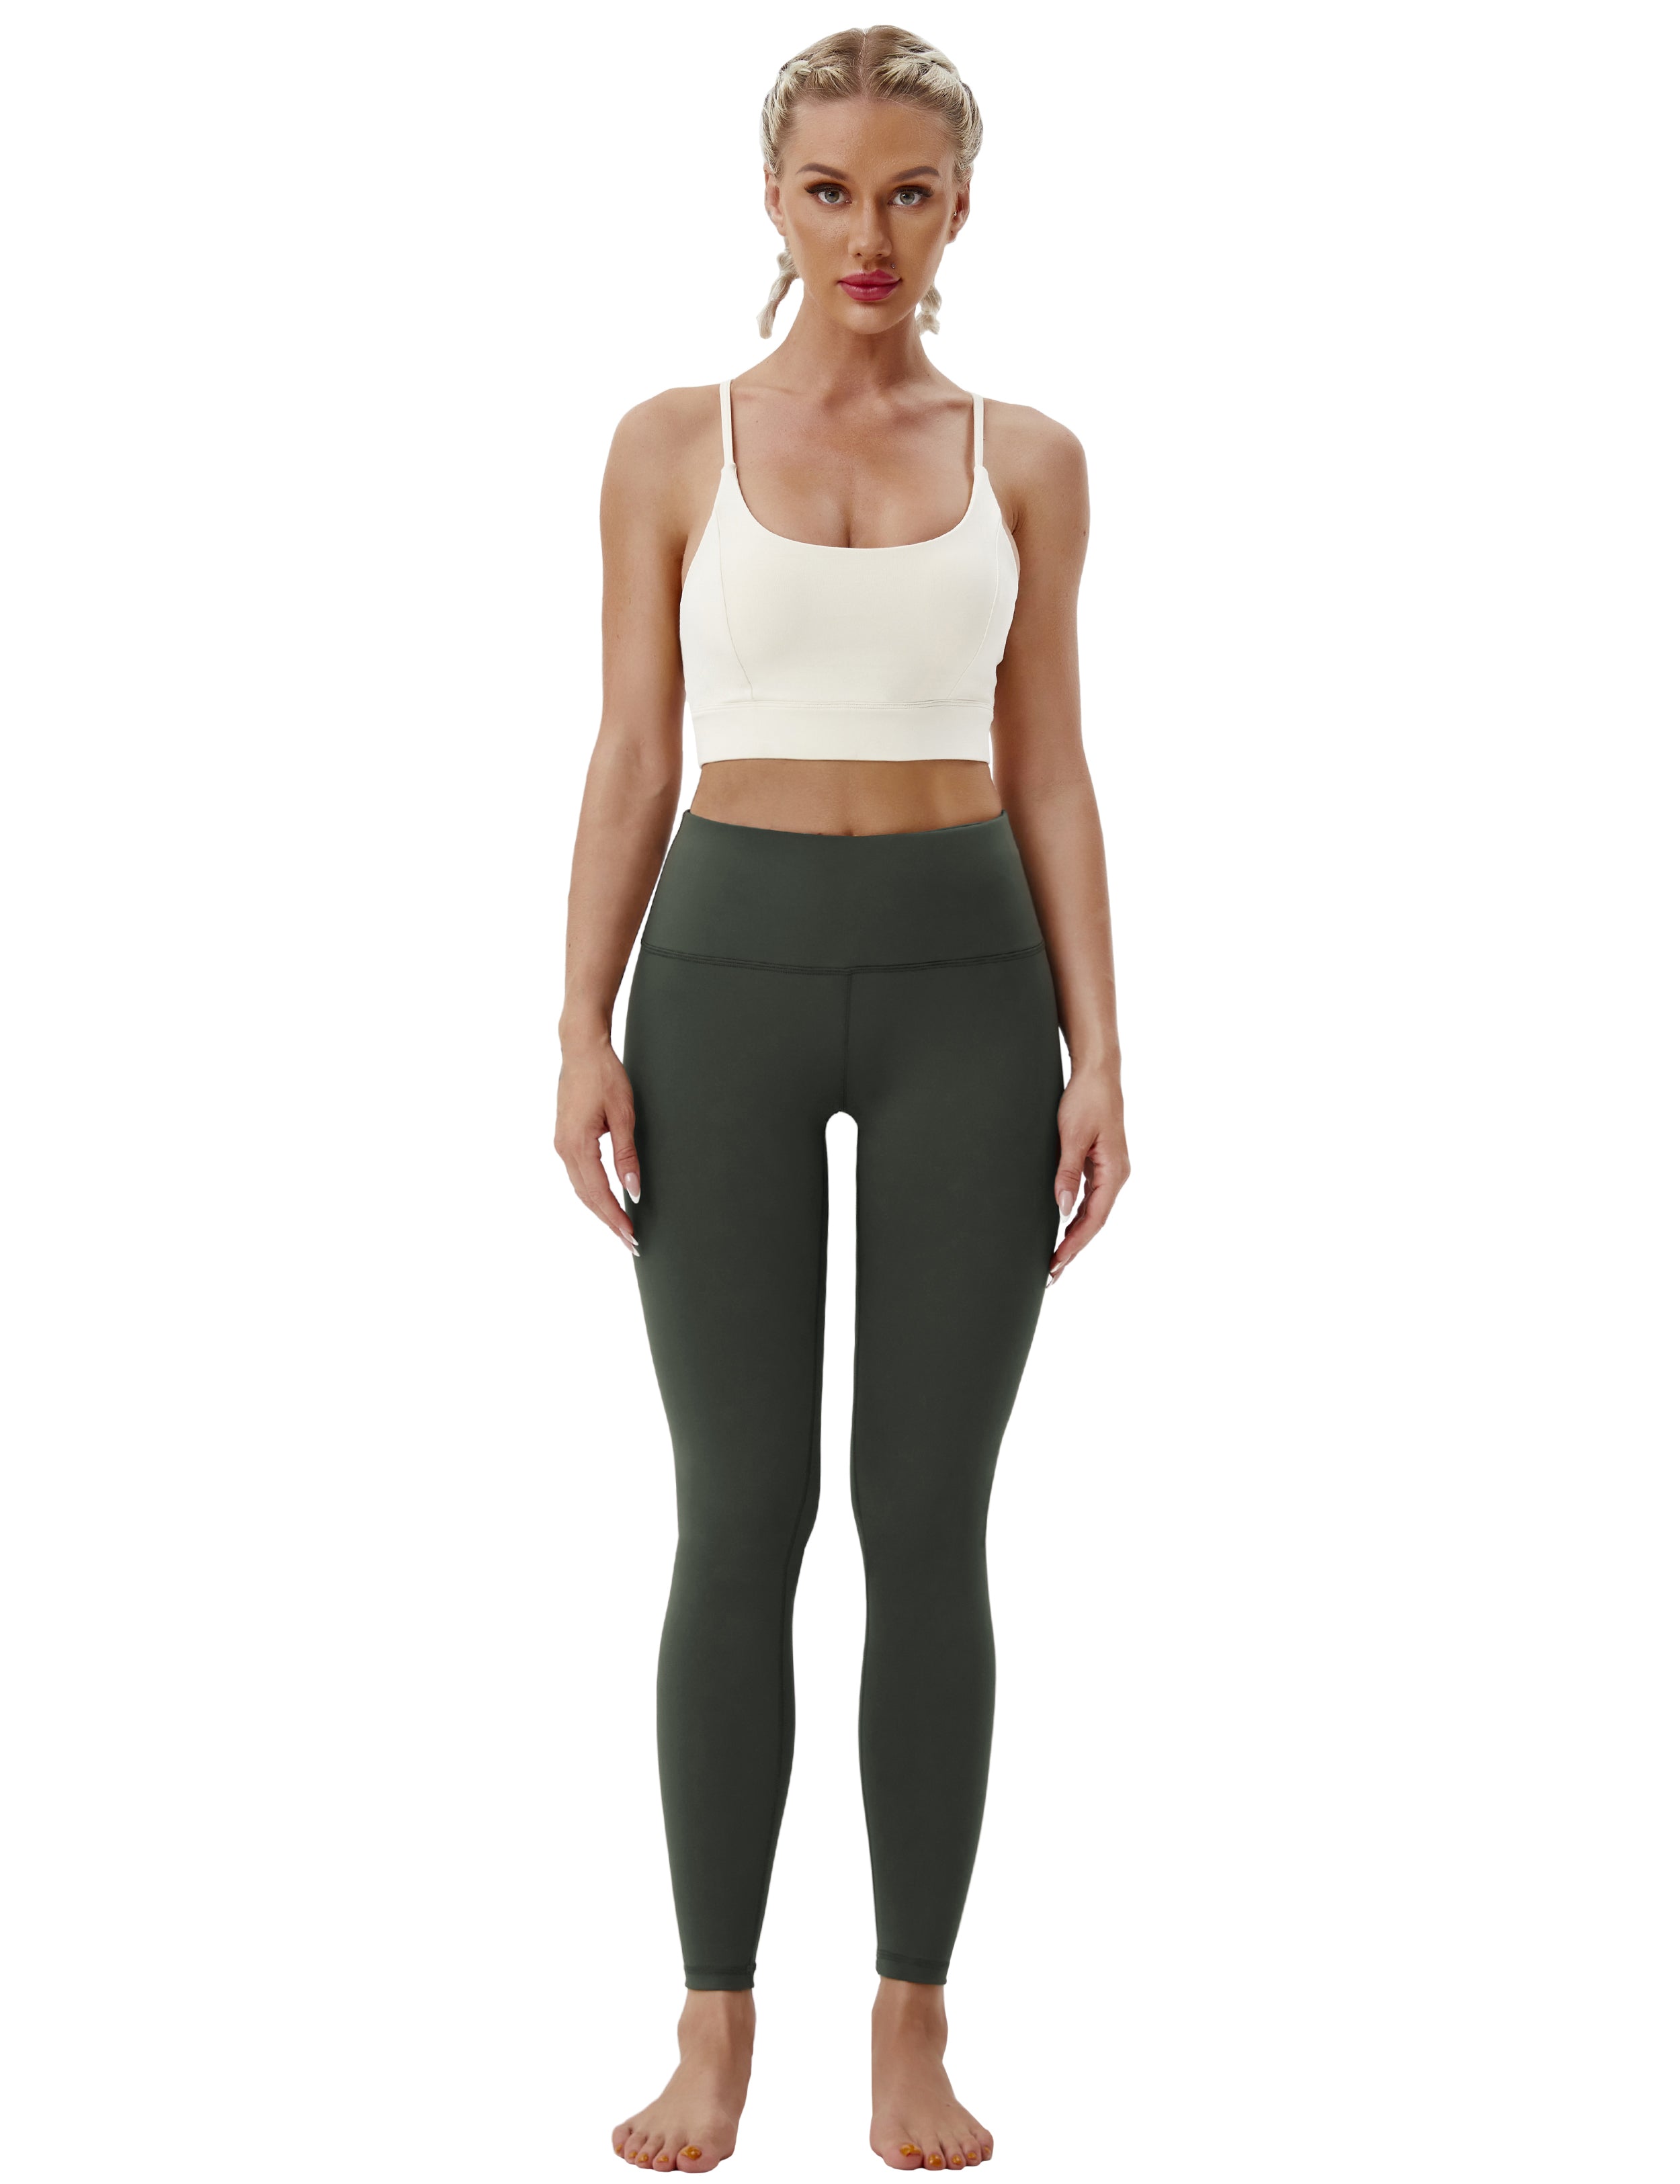 High Waist Yoga Pants olivegray 75%Nylon/25%Spandex Fabric doesn't attract lint easily 4-way stretch No see-through Moisture-wicking Tummy control Inner pocket Four lengths